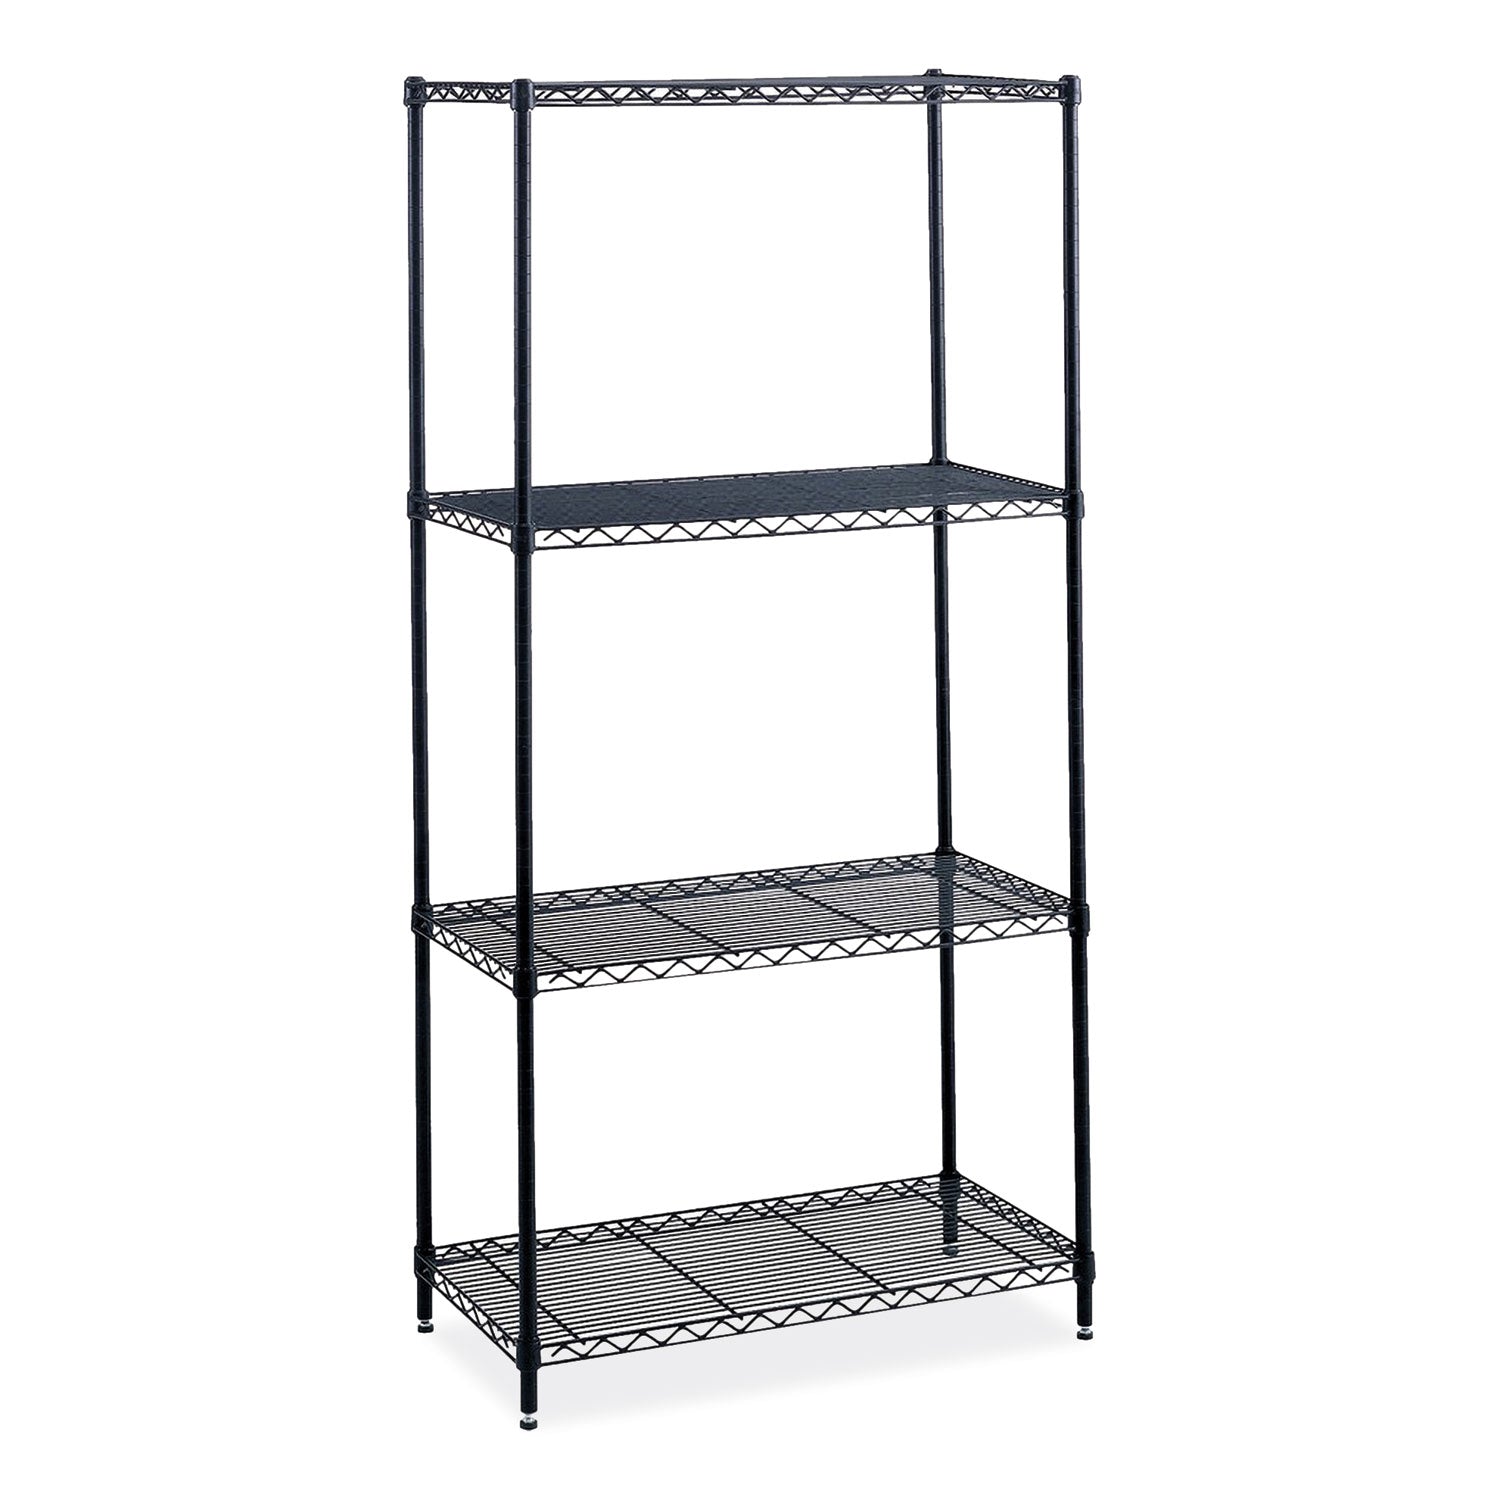 Industrial Wire Shelving, Four-Shelf, 36w x 18d x 72h, Black, Ships in 1-3 Business Days - 